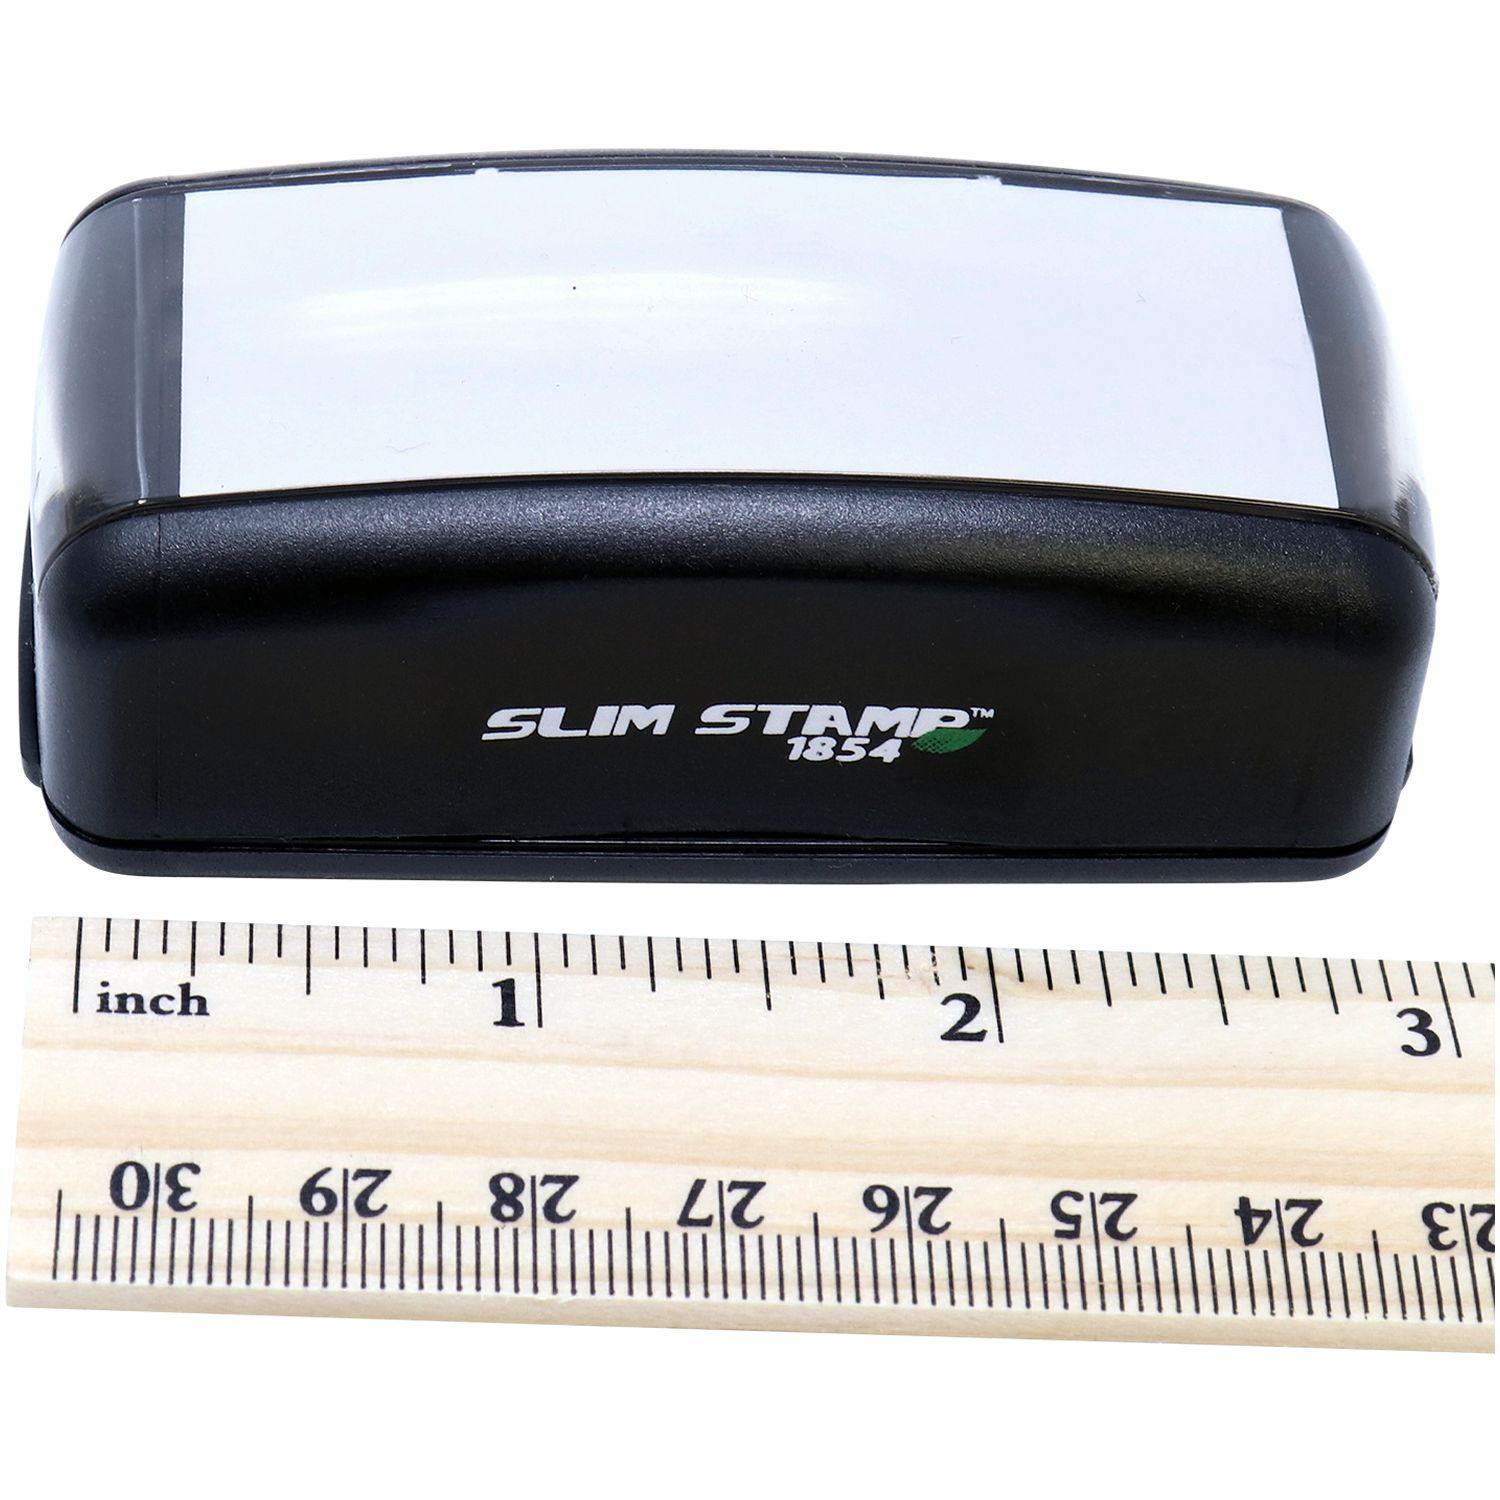 Measurement Large Pre Inked Advance Directive Stamp with Ruler